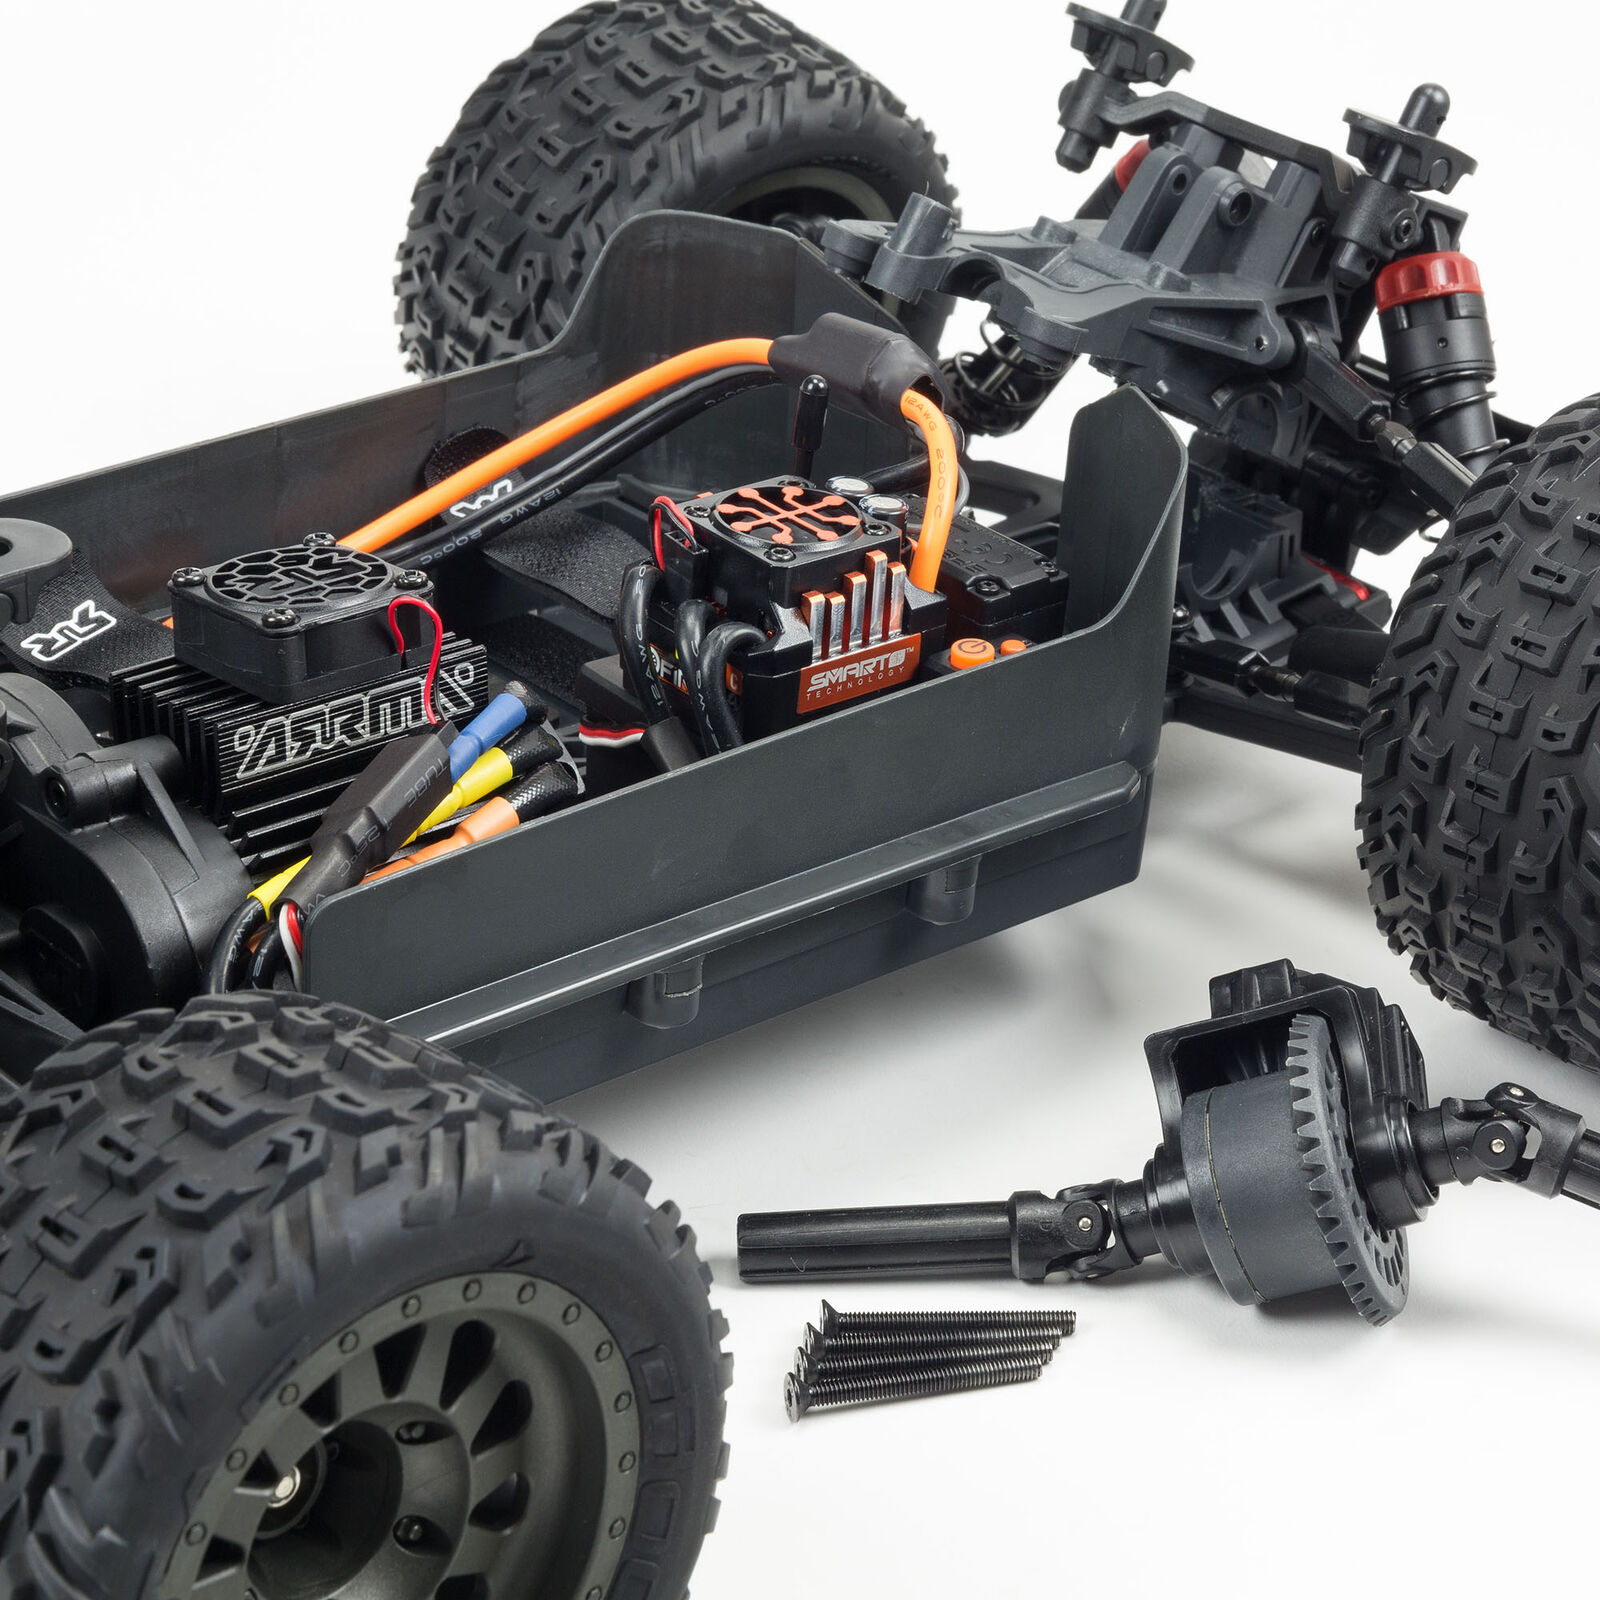 What are your experiences with the Arrma Vorteks 4x4 BLX 3s? : r/rccars